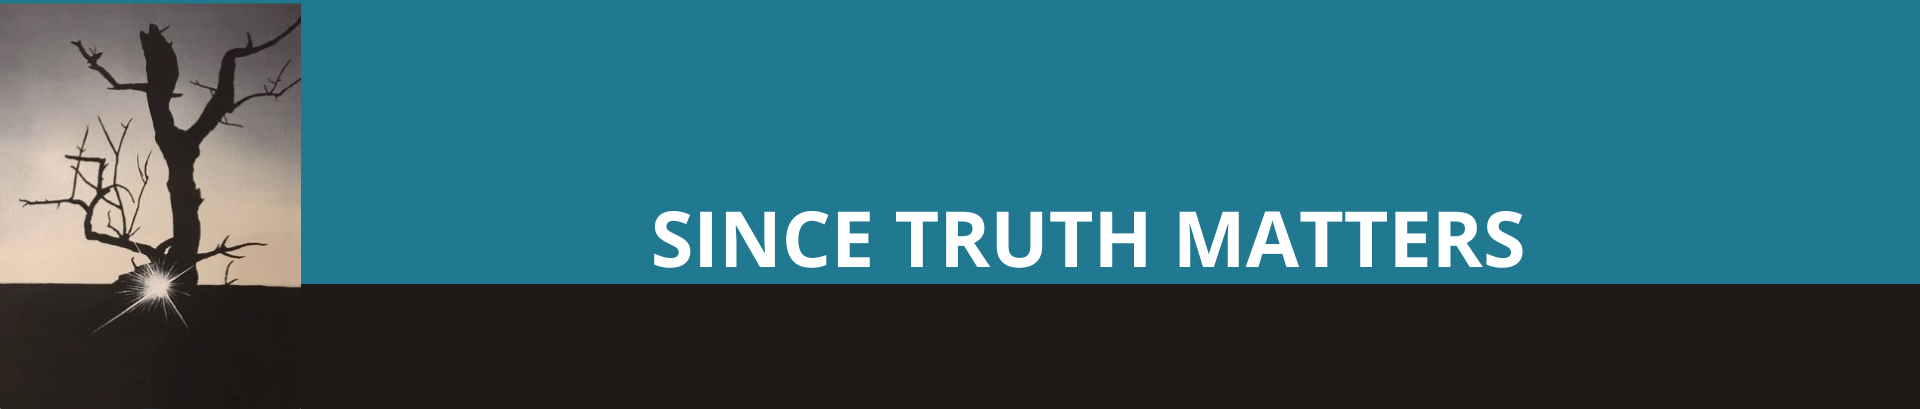 Since Truth Matters logo